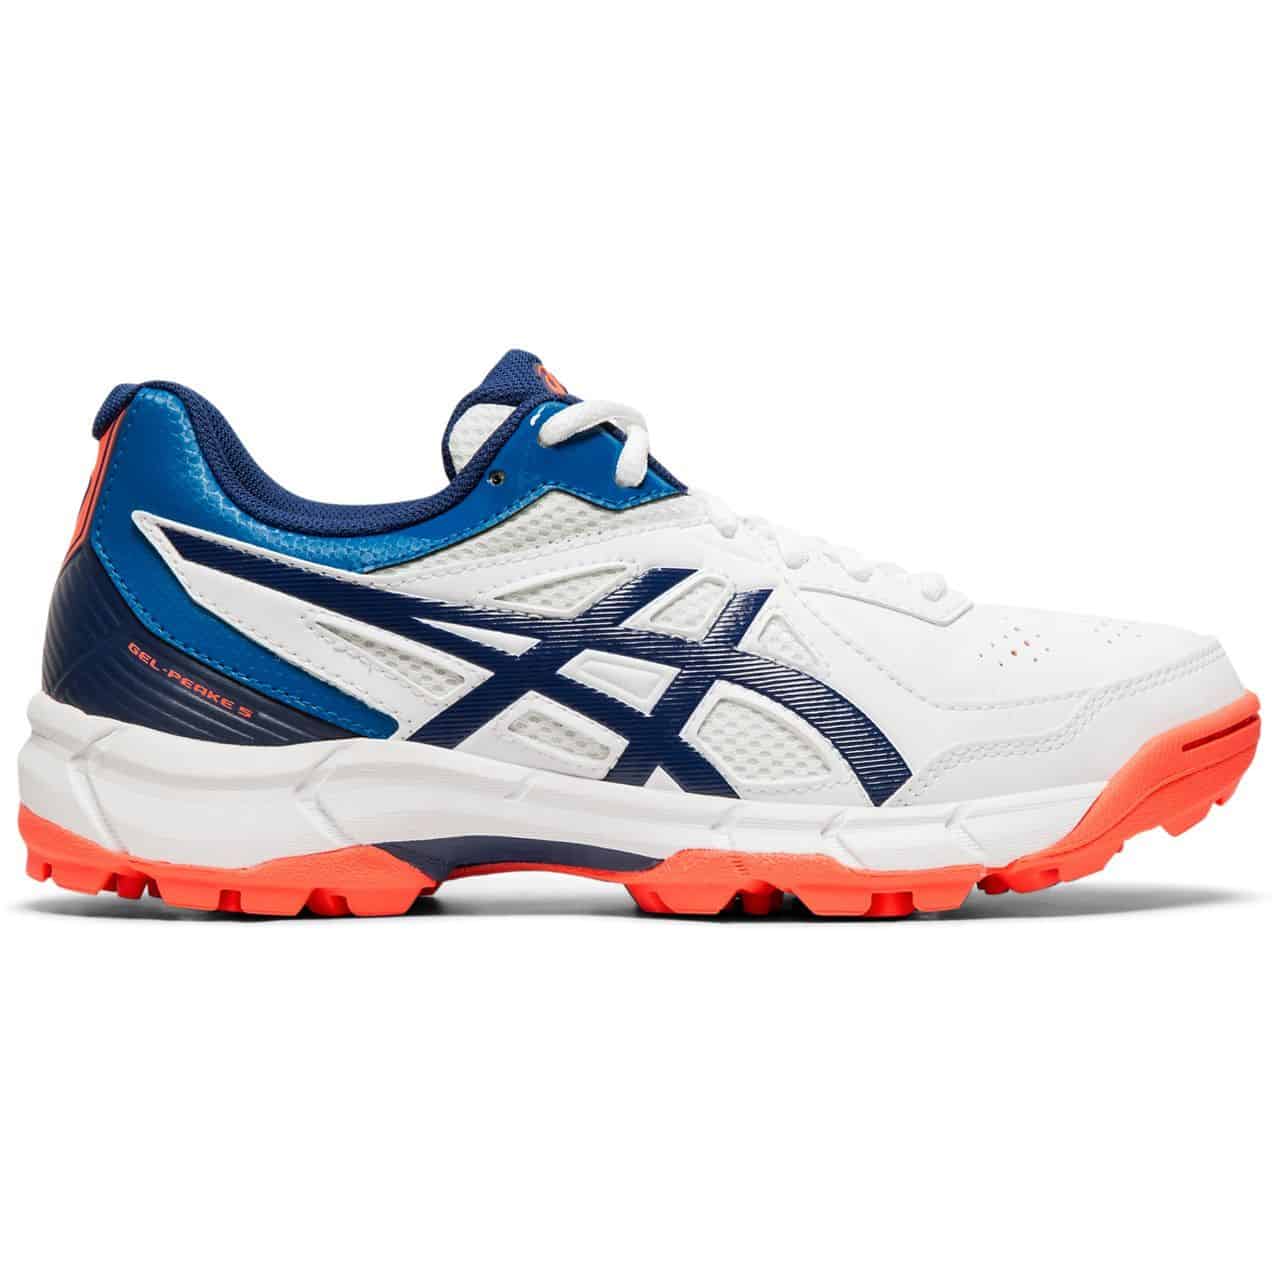 asics 300 not out,Save up to 18%,www.ilcascinone.com